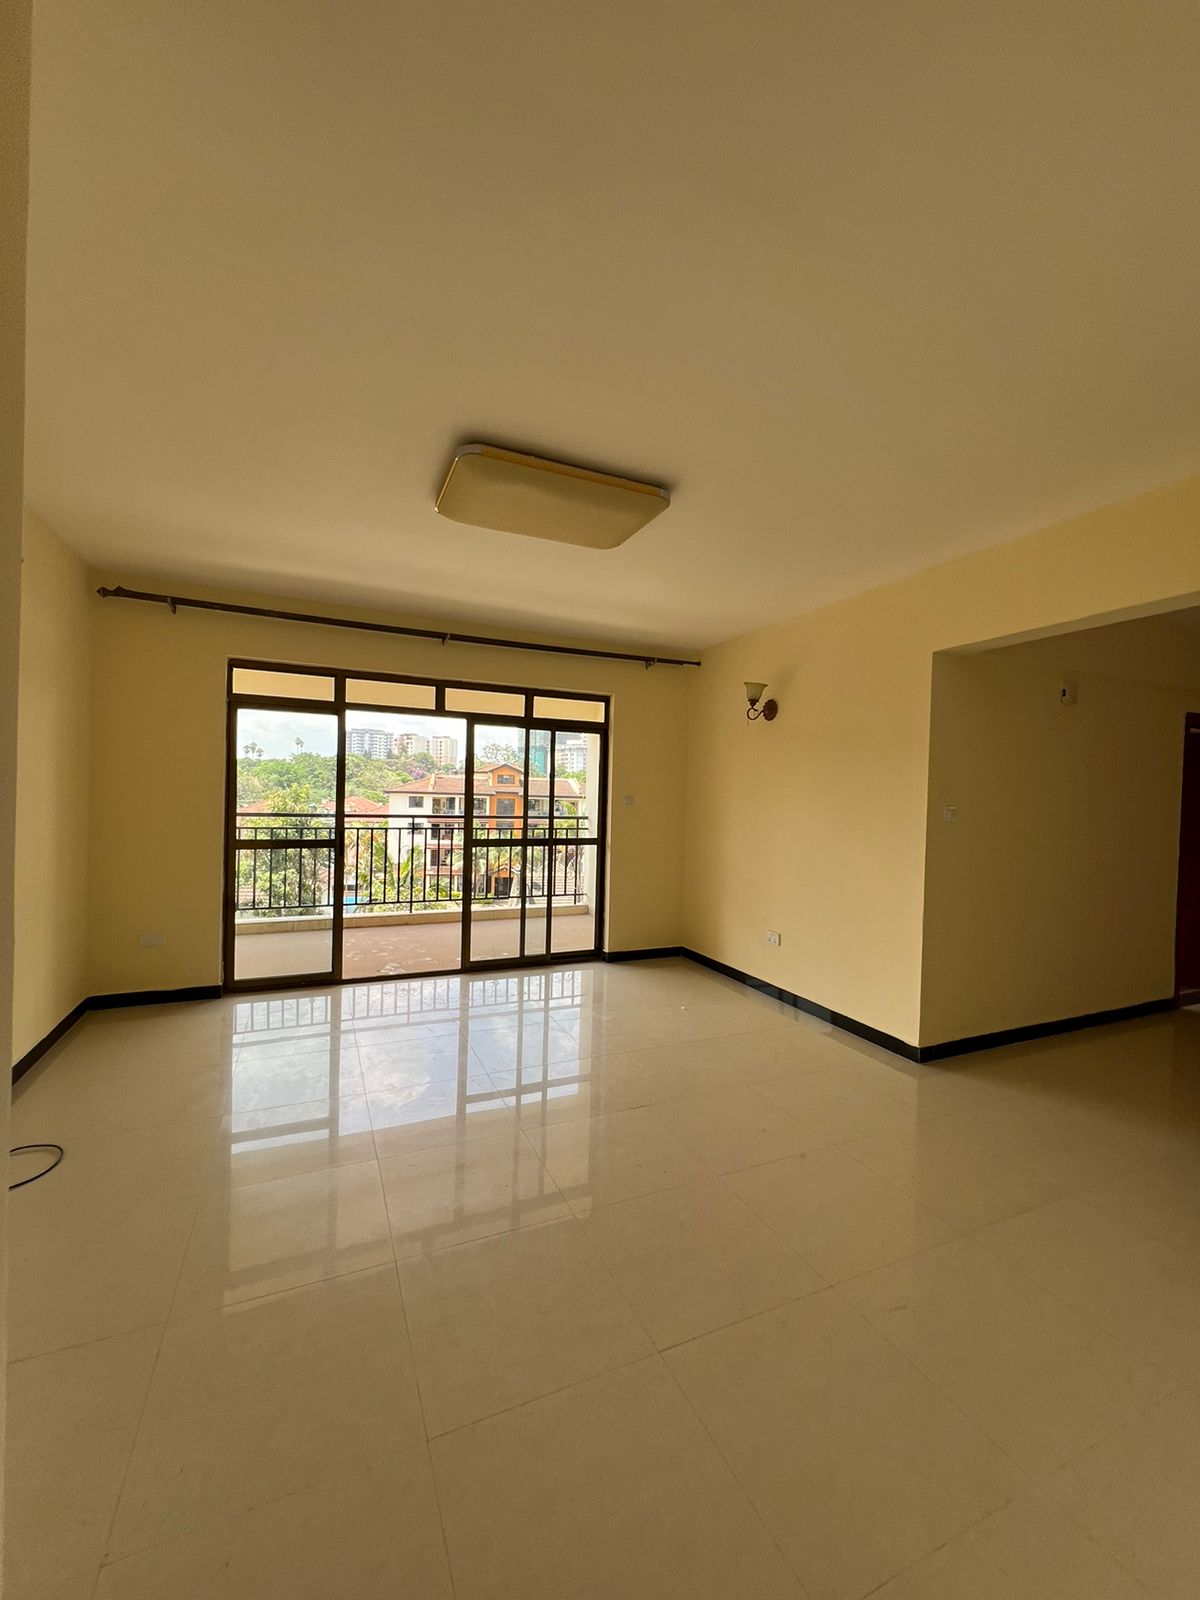 2 bedroom apartment for rent located in the heart of kileleshwa -All bedroom en suite -open plan kitchen -spacious sitting area -ample car parking...